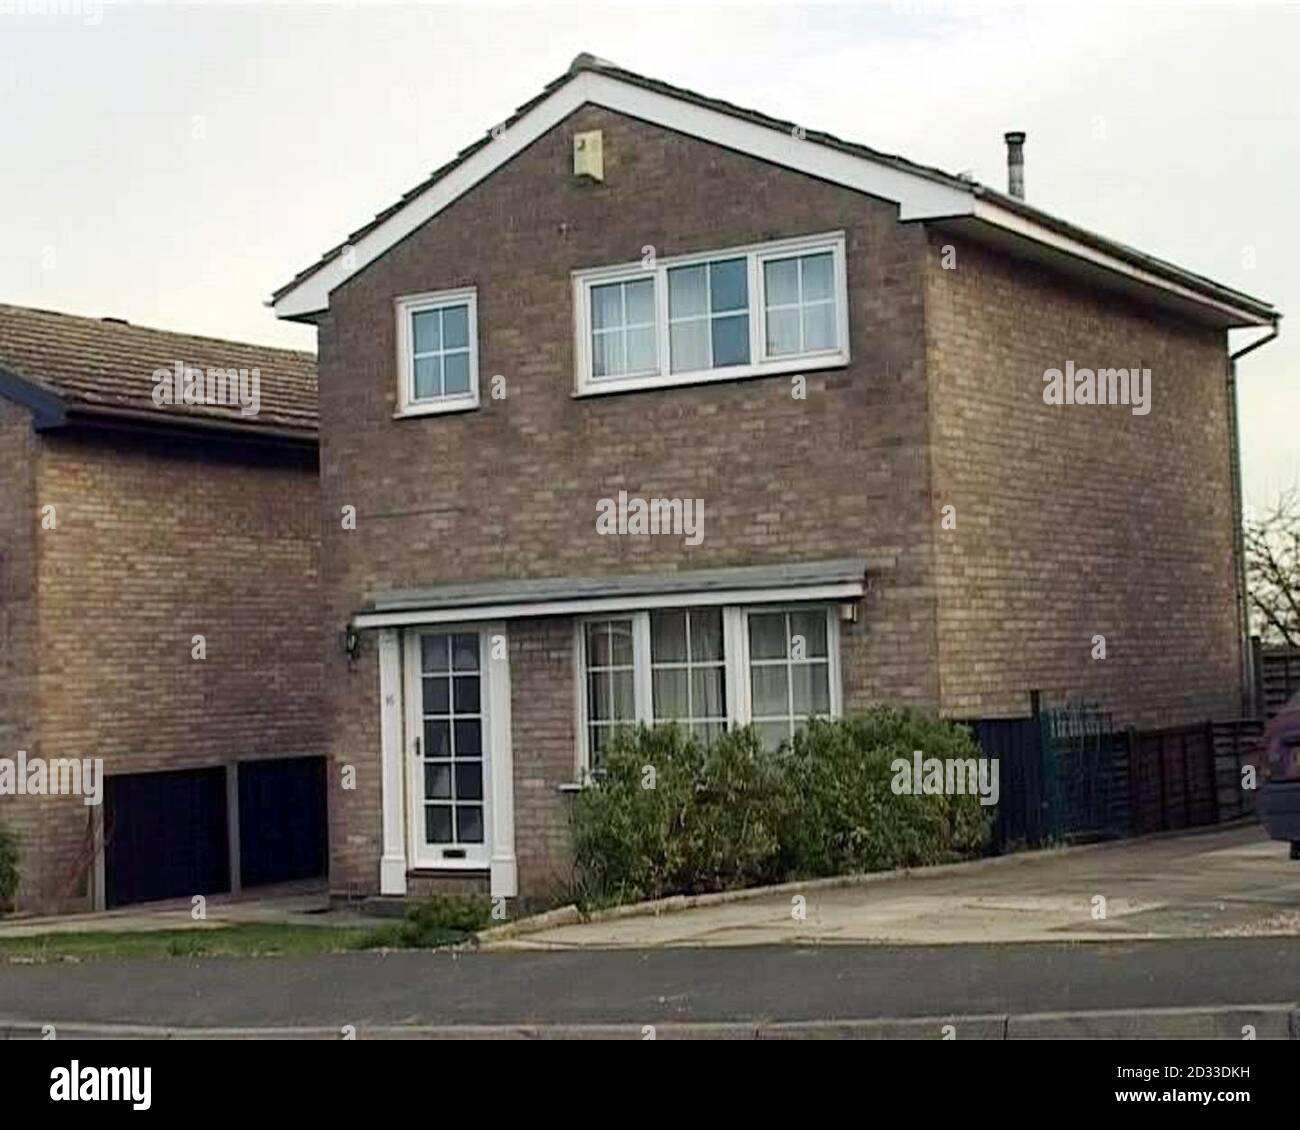 The house in Stillwell Drive, Sandal, near Wakefield in West Yorkshire, which was purchased December 2000 by Alan and Susan Sykes who were unaware that the property was where Dr Samson Perera, a dental biologist at Leeds University, had butchered his 13-year-old adopted daughter in 1984 and hidden her body parts.  Mr and Mrs Sykes are seeking damages at the High Court in London from the vendors of the property who they say should have told them of its gruesome past. Stock Photo